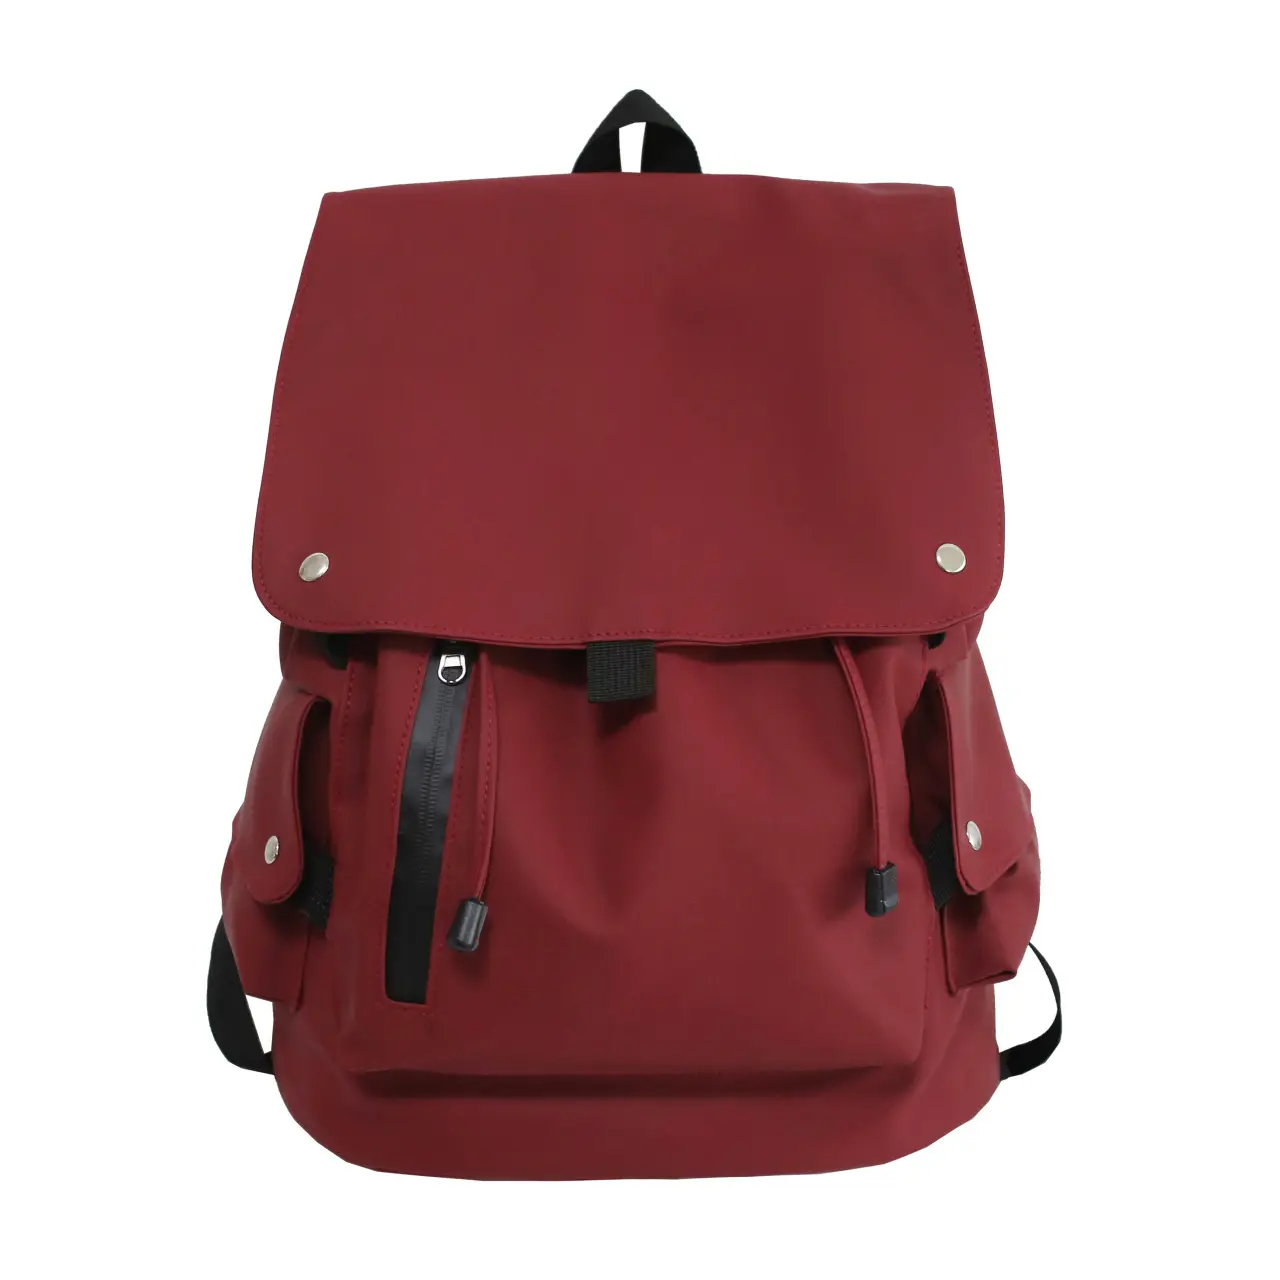 Good Price Promotional Large Capacity Casual Travel Color Outdoors High Quality Computer Custom Backpack Bags